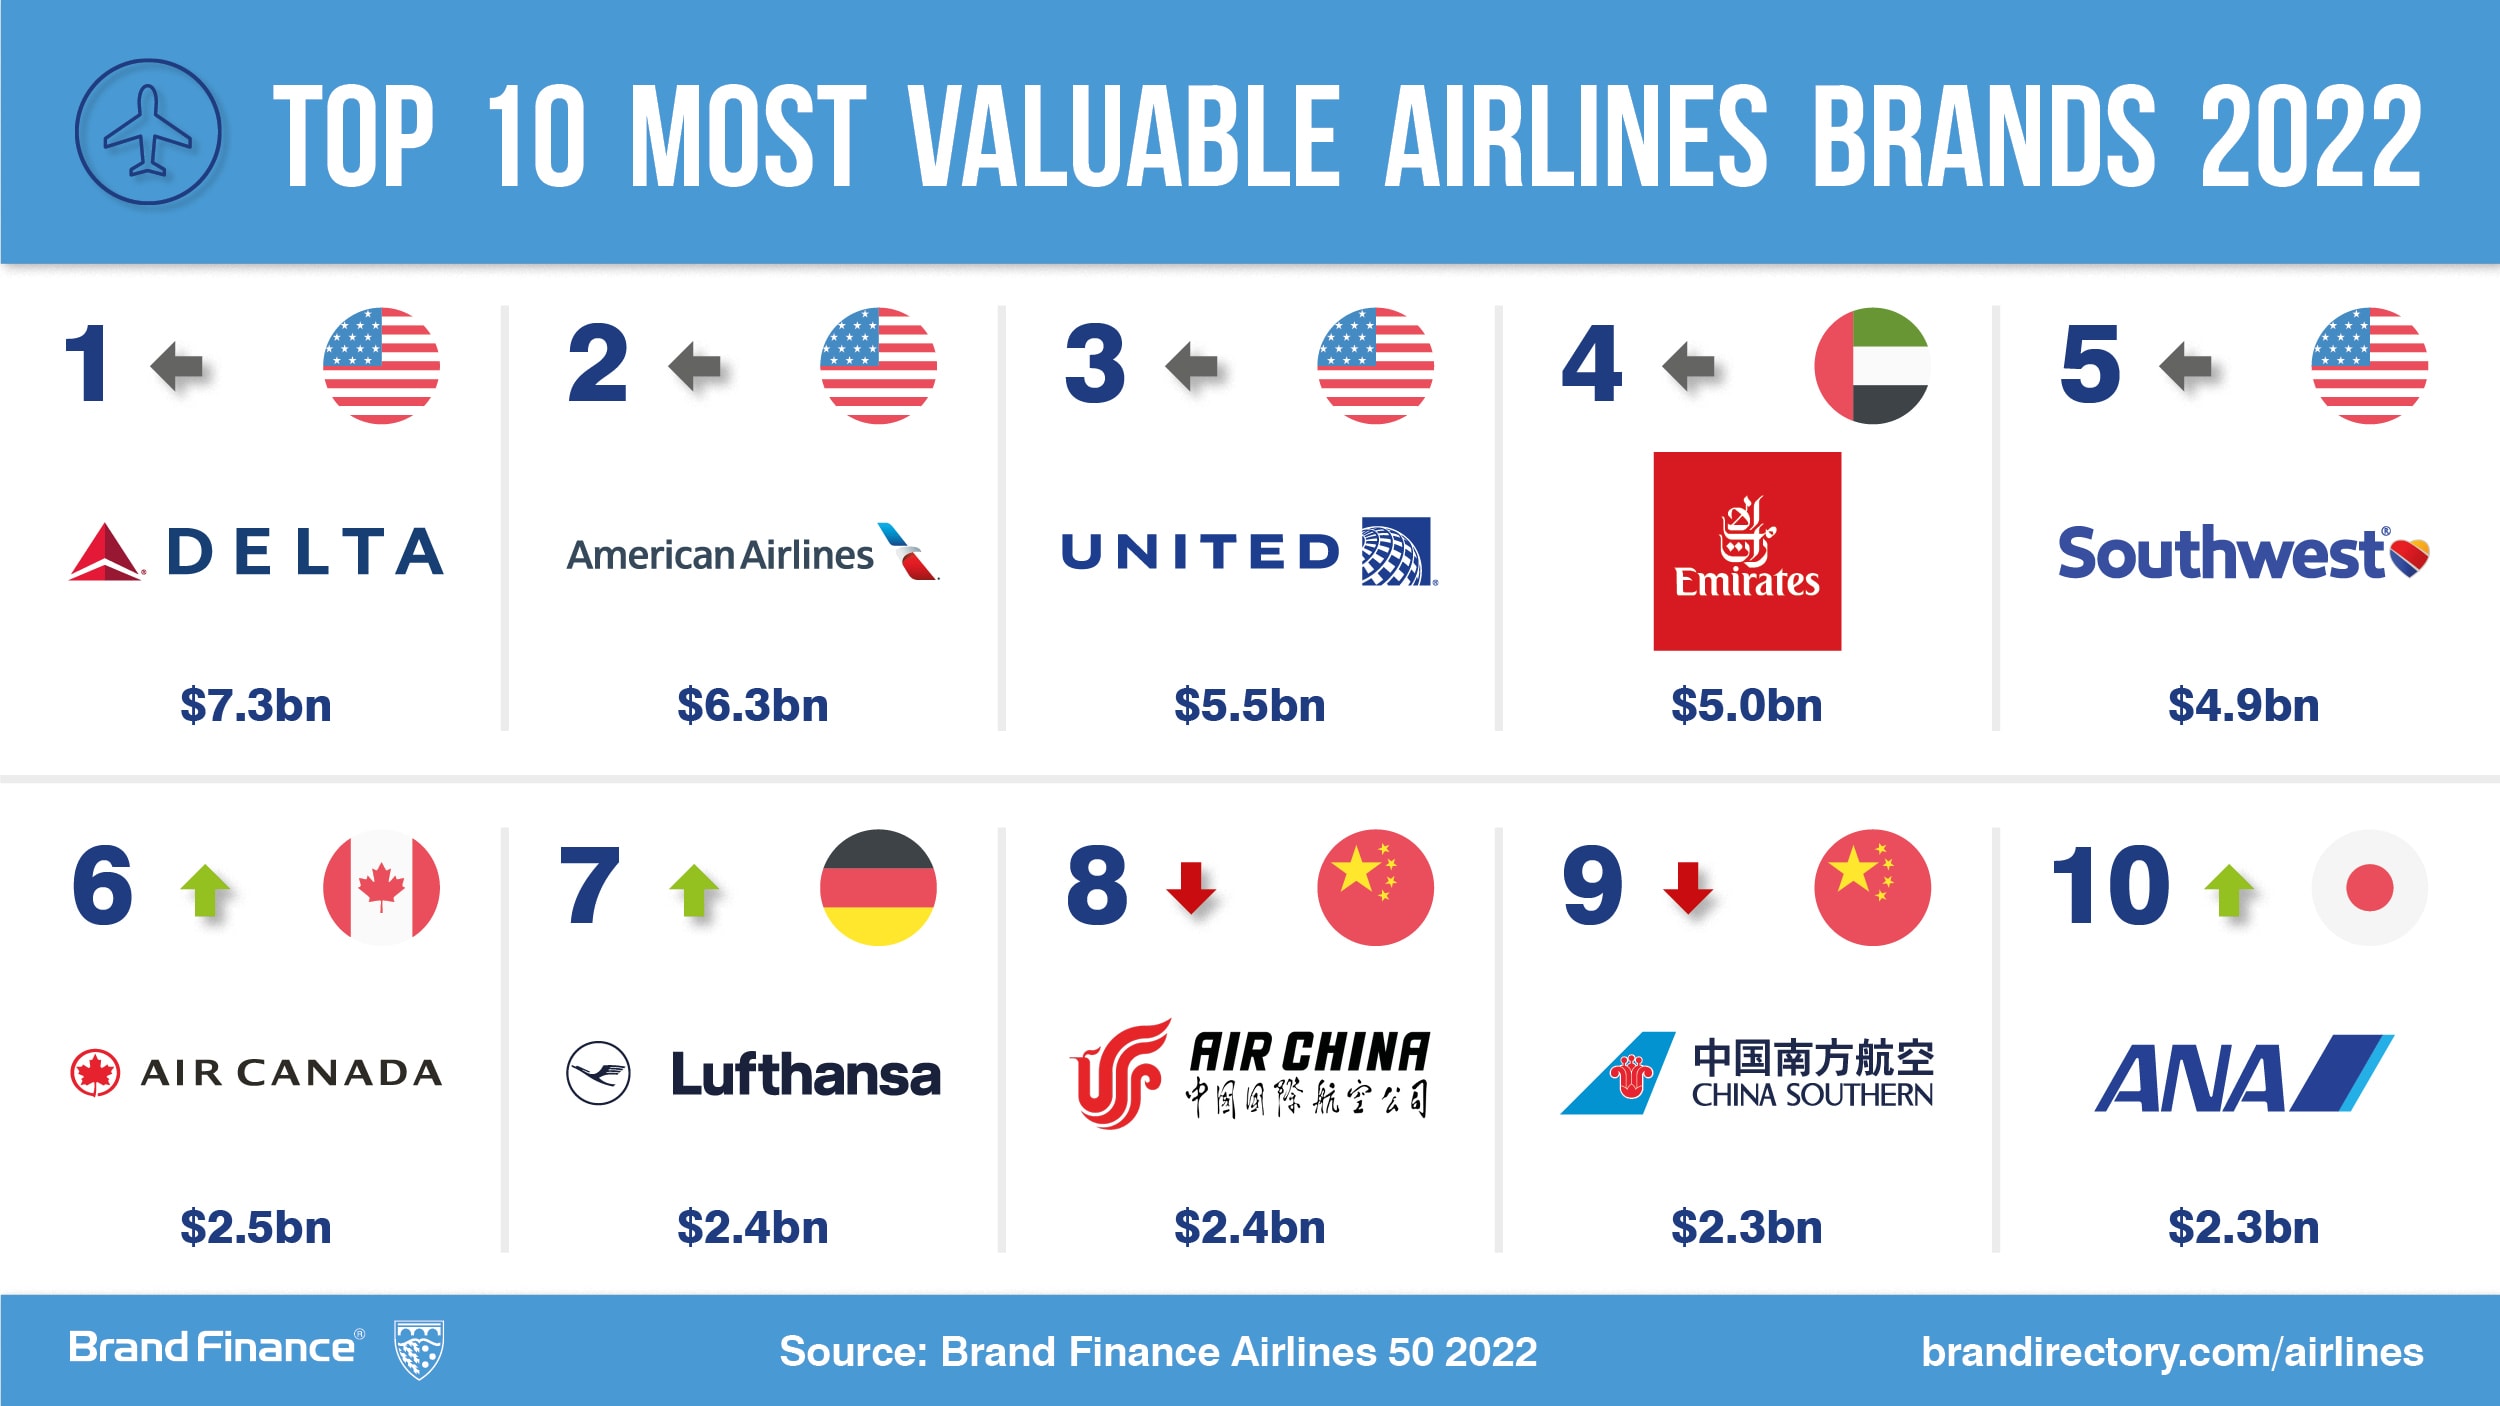 Delta retains top position as most valuable airlines brand in the world as airlines begin COVID